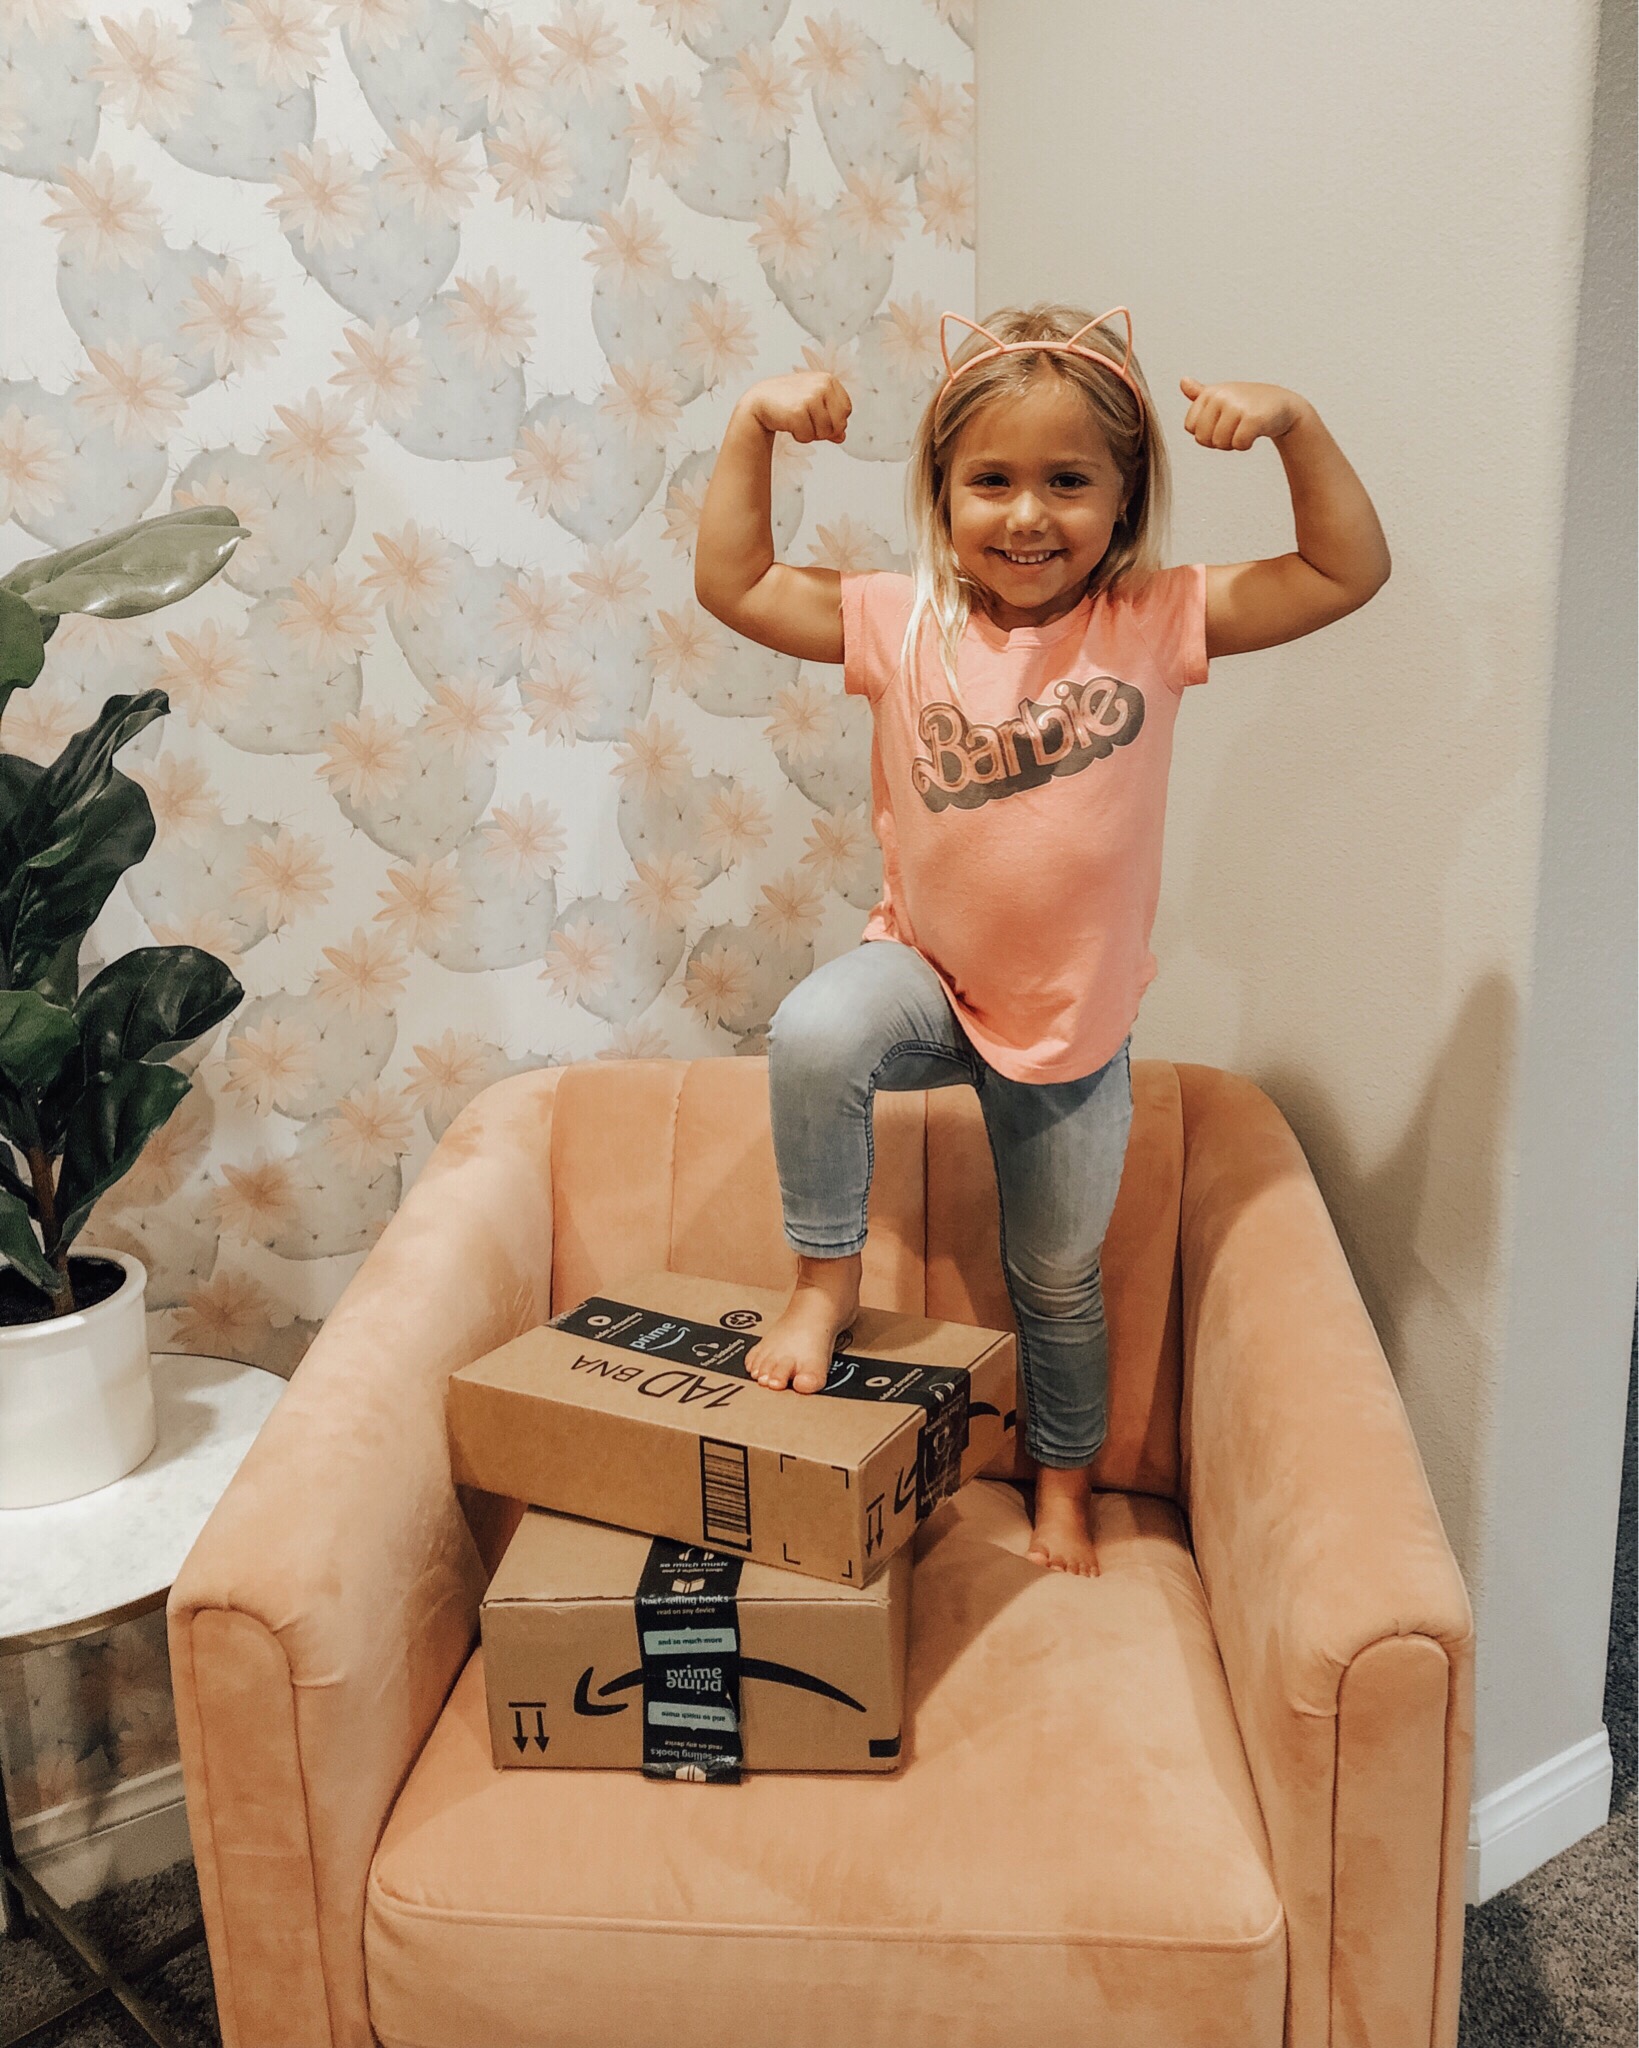 AMAZON PRIME DAY- MY FAVORITES - Jaclyn De Leon Style- Amazon Prime day is here and I'm sharing the best of all the deals. From fashion to electronics and more. Grab the best things all on major discount!